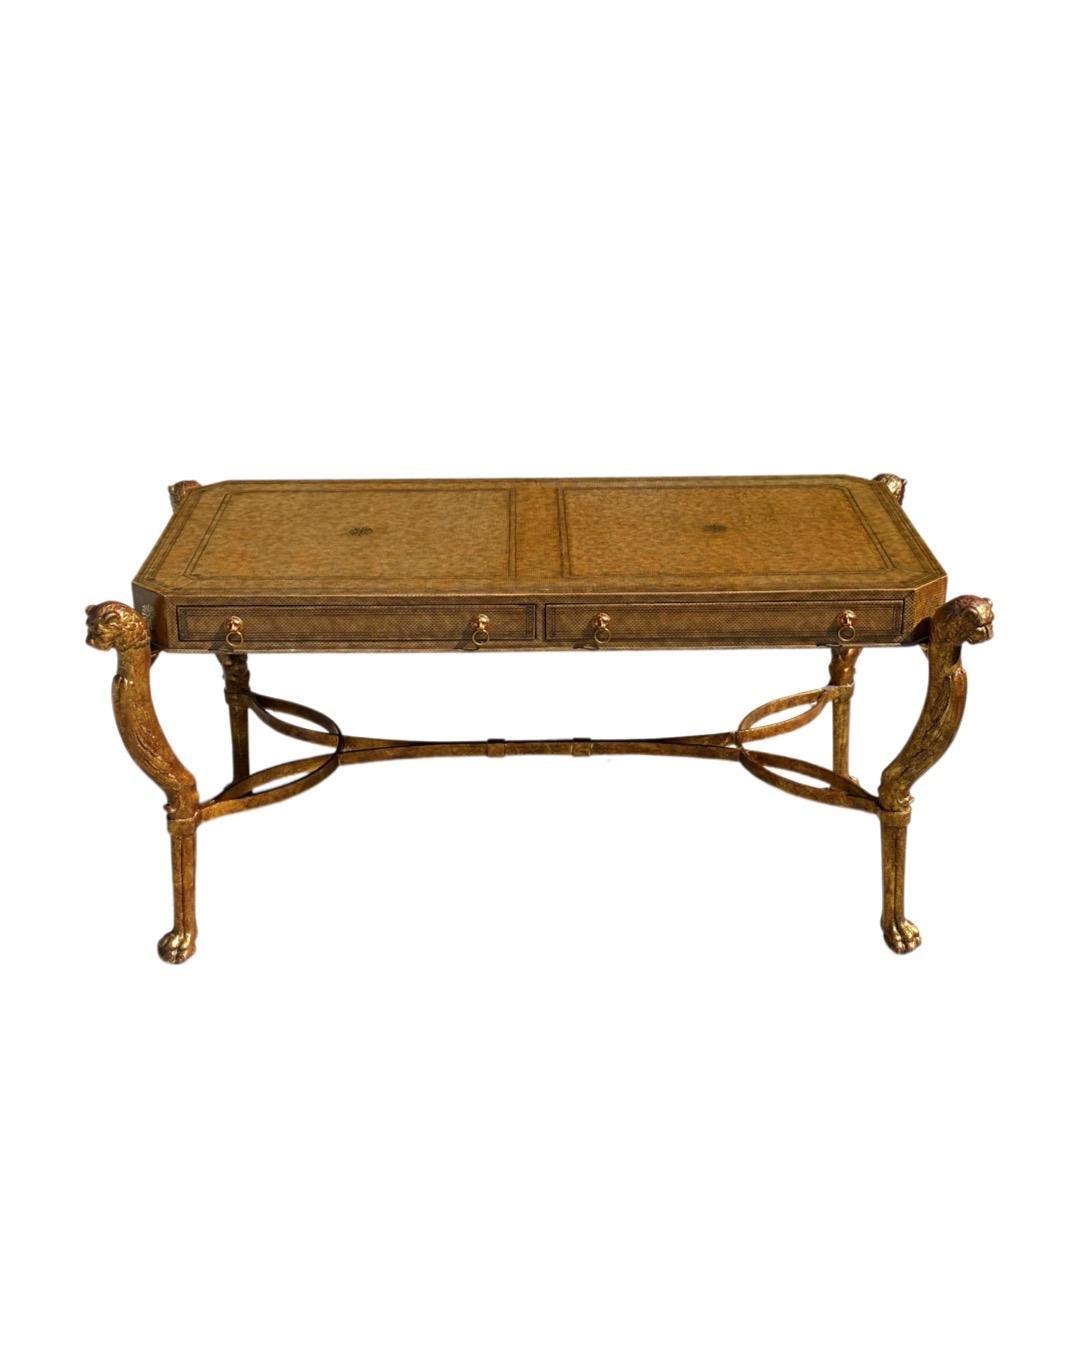 Late 20th Century Neoclassical Desk by Maitland Smith in Leather and Gilt Wrought Iron, Lion Head